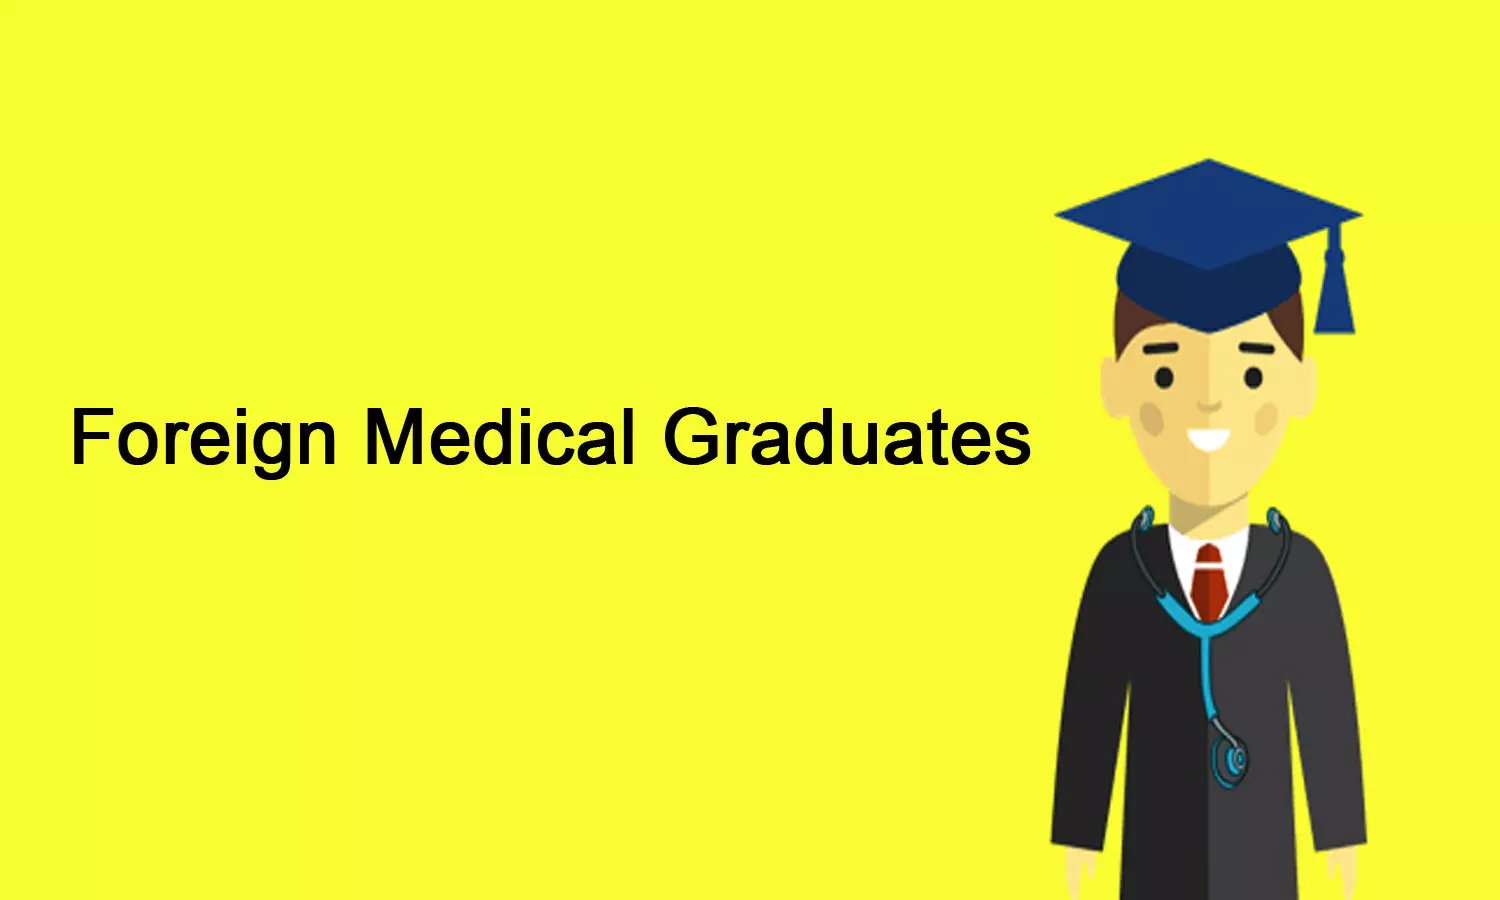 Tamil Nadu to rope in Foreign Medical Graduates as one time measure to Battle COVID-19: Report